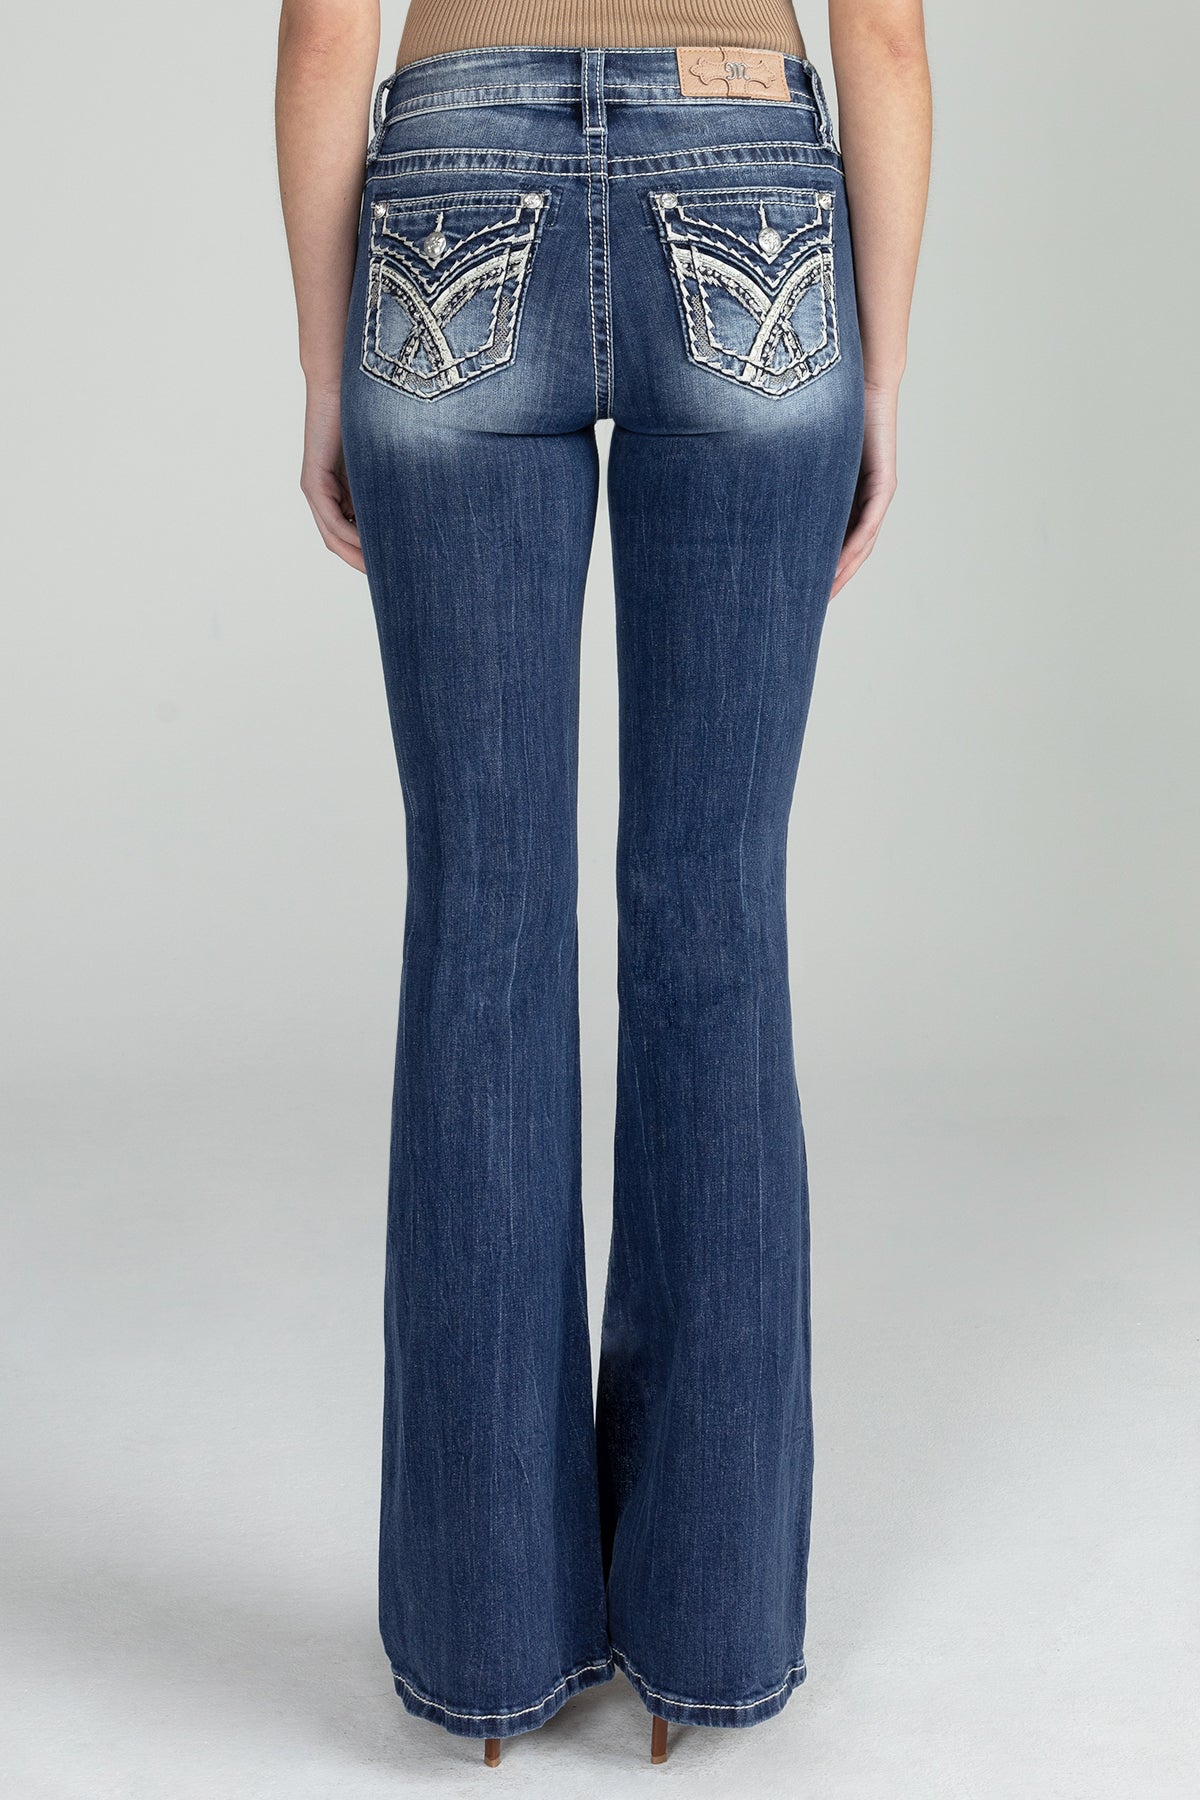 Style & Fit Review: Skinny Flare Denim 